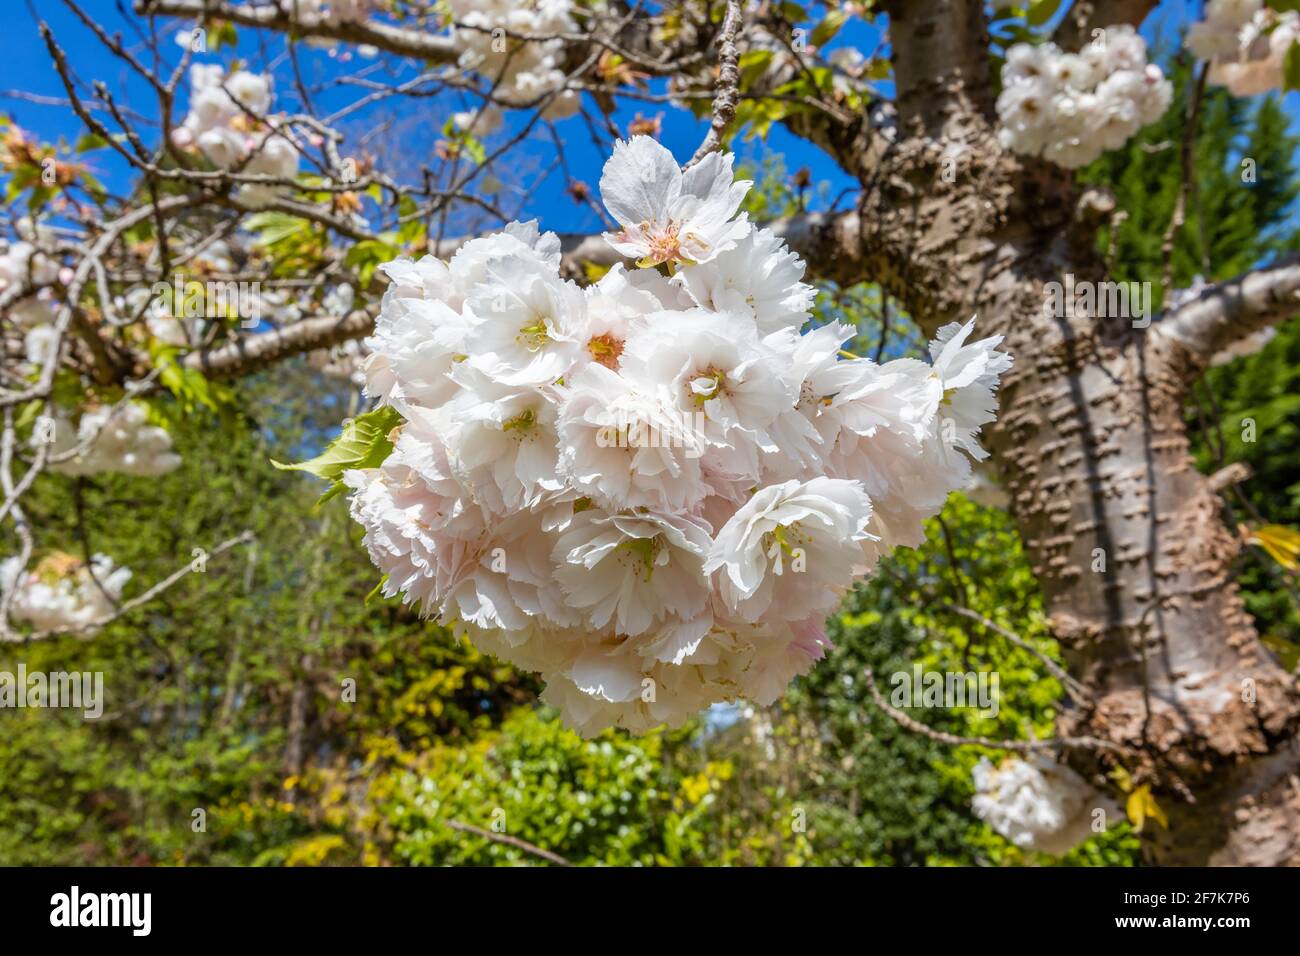 Close-up view of dense white pretty blossom flowers on a flowering ornamental cherry tree in a garden in spring in Surrey, south-east England, UK Stock Photo